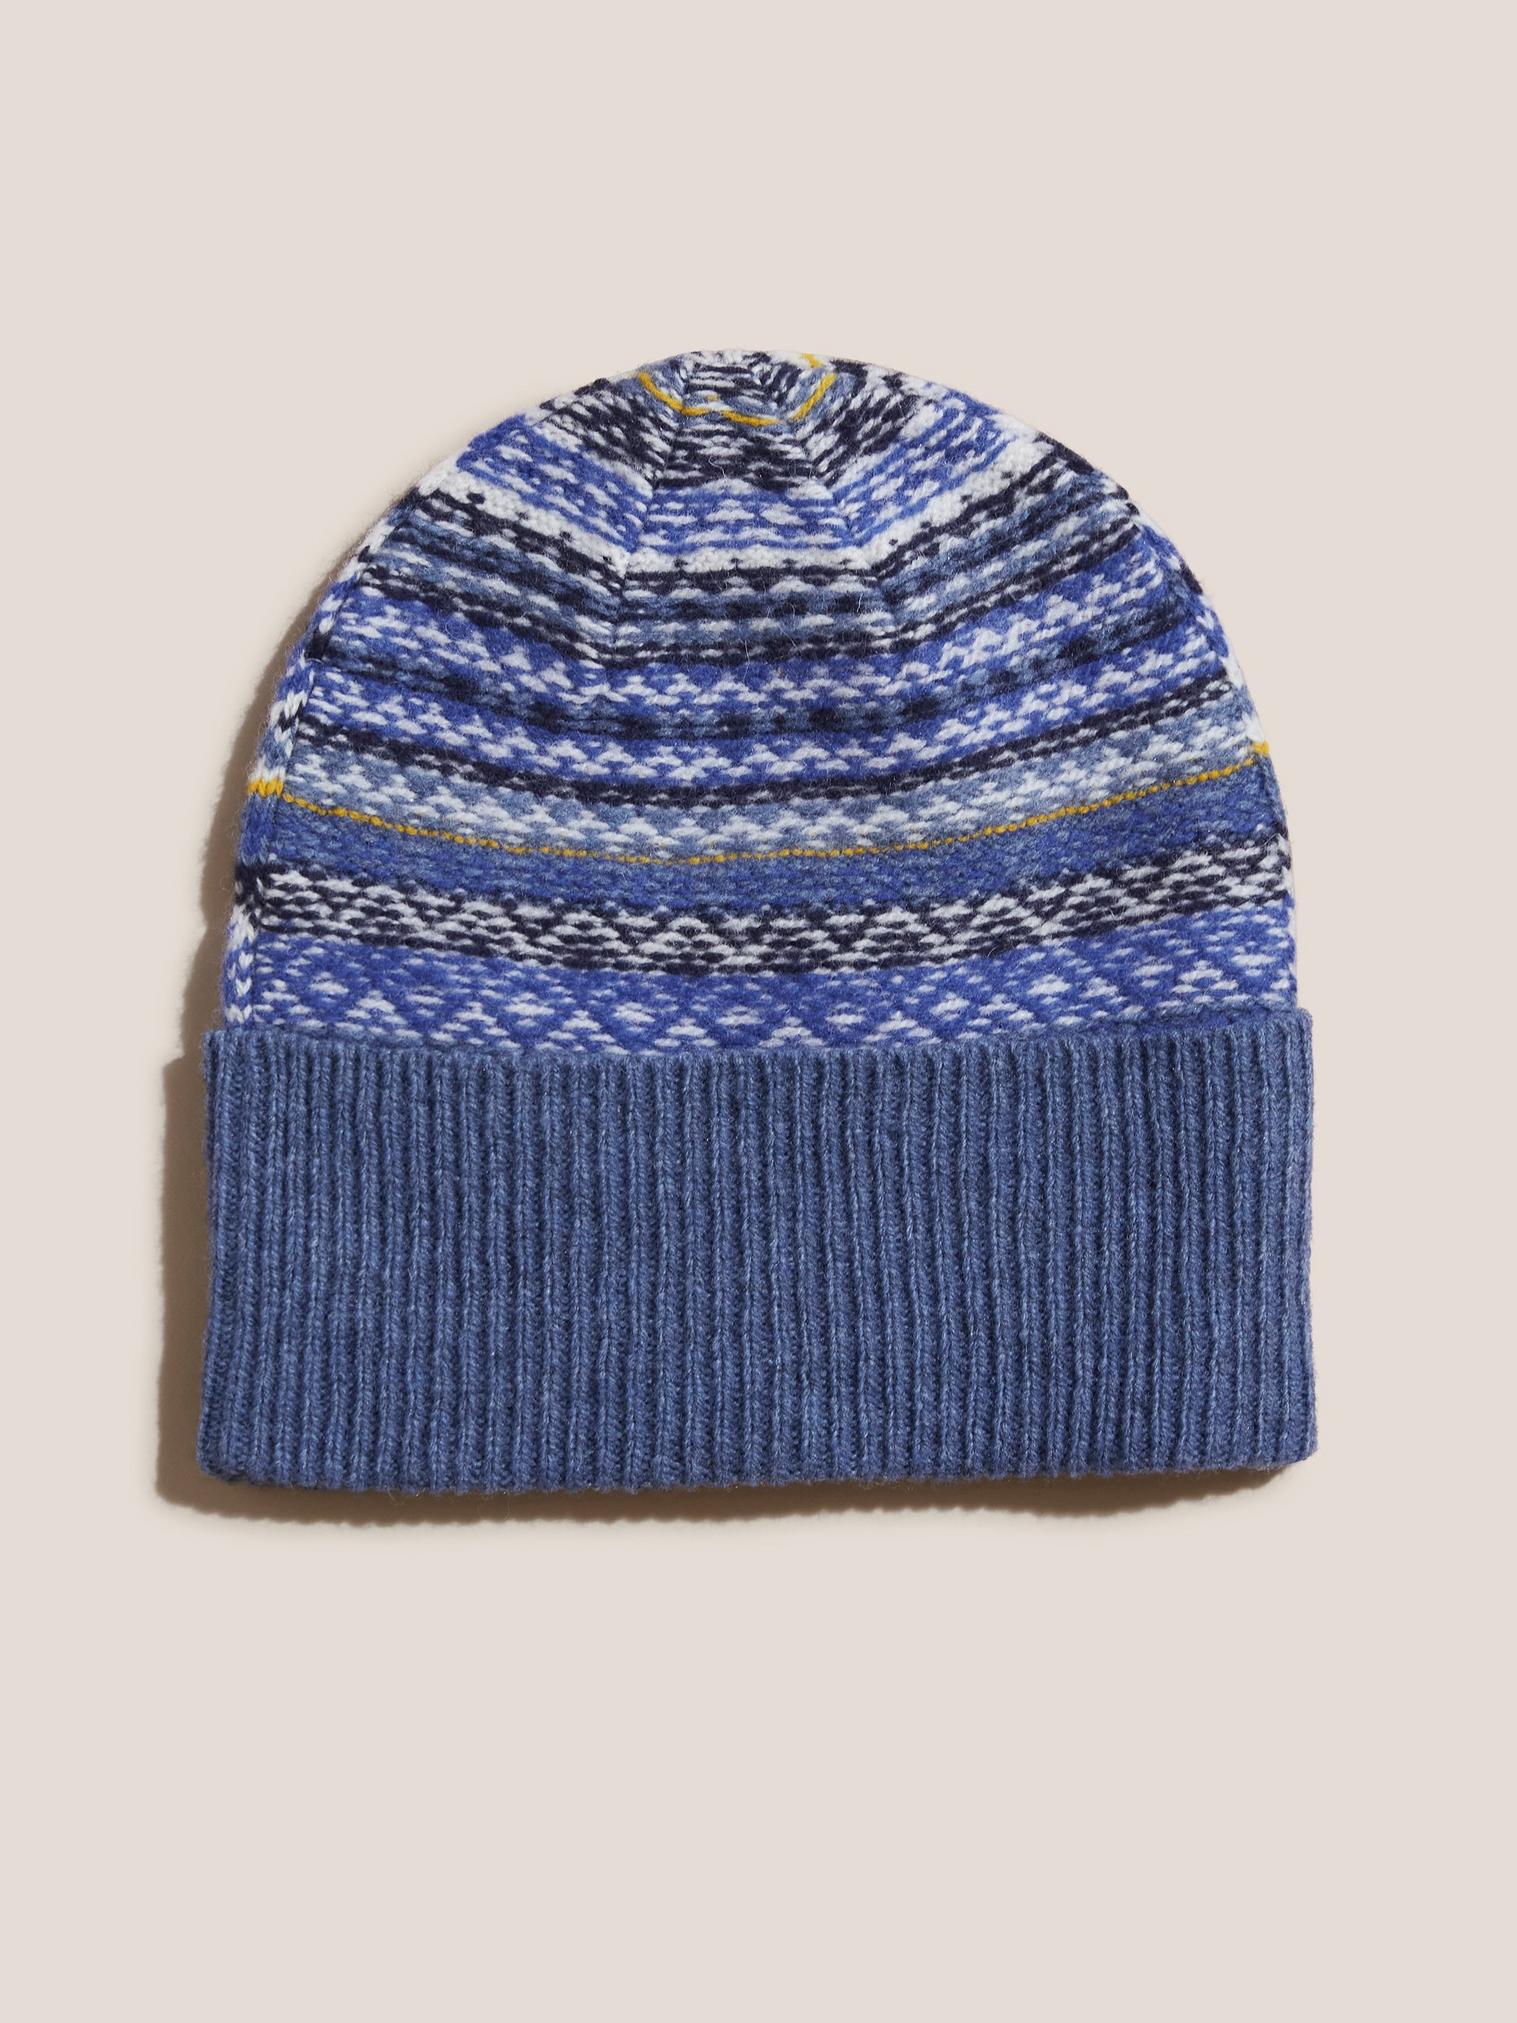 Mixed Fairisle Knitted Beanie in BLUE MLT - FLAT FRONT